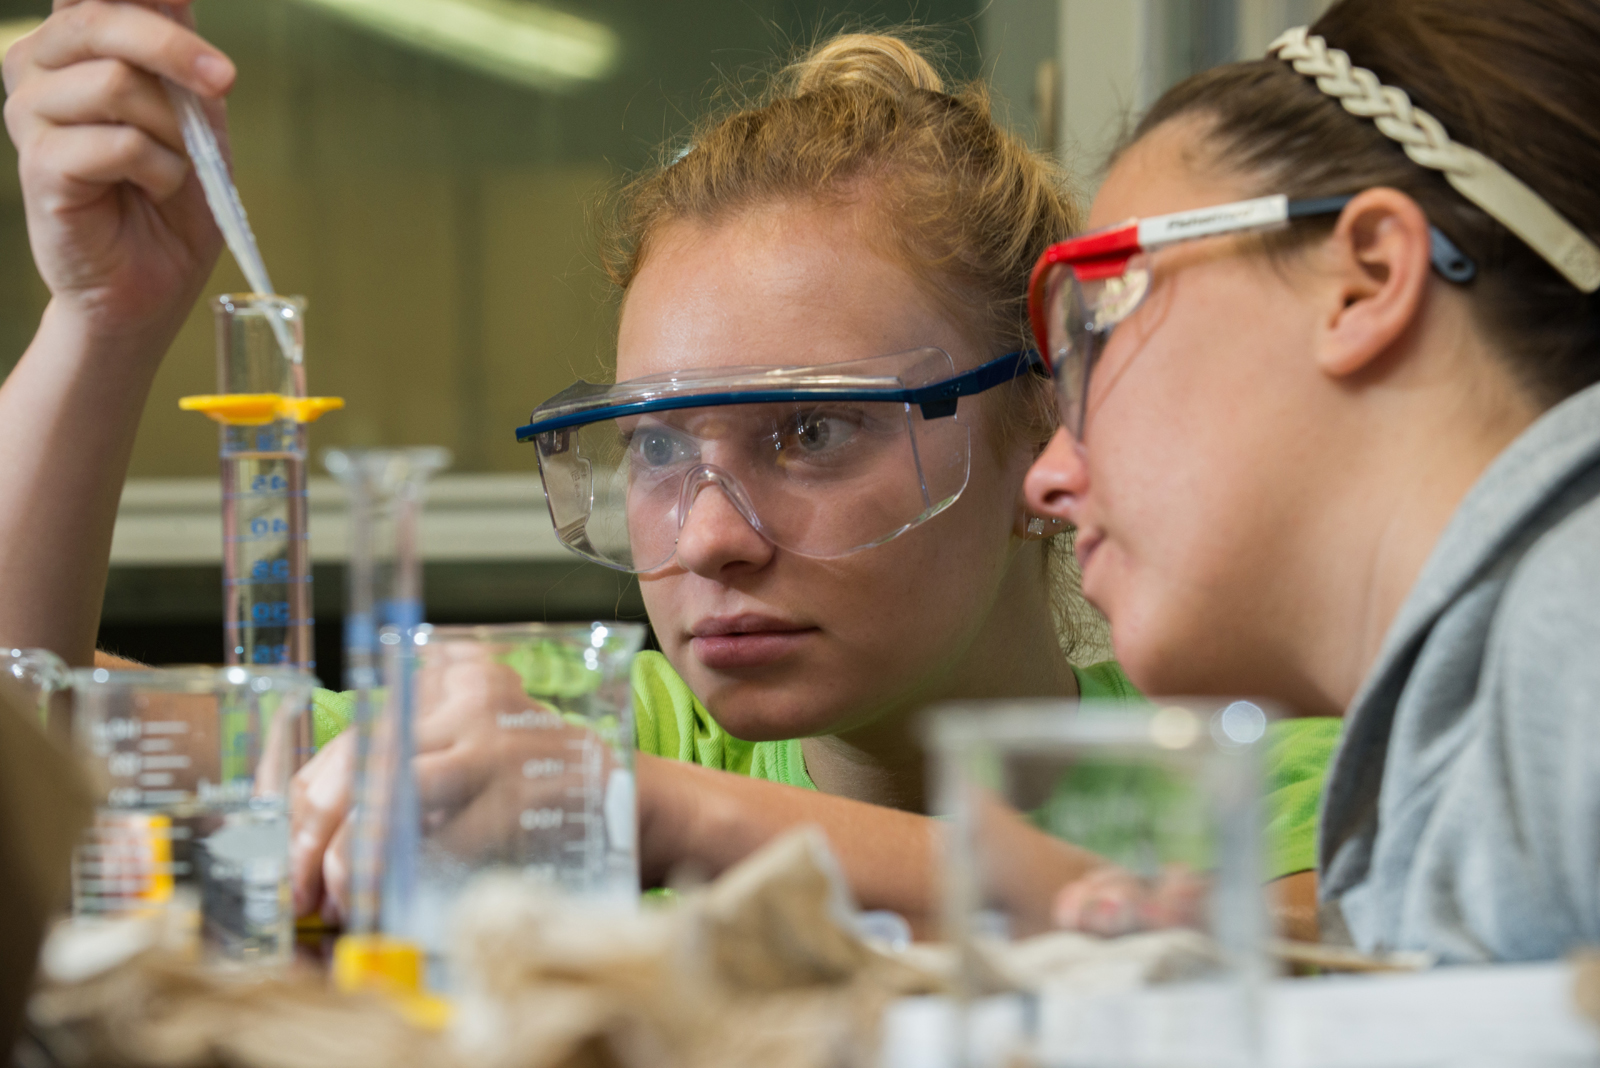 UNL chemistry students work on an experiment in a Hamilton Hall lab. UNL is one of 10 institutions in the United States selected to participate in the Beckman Scholars Program this year. (Photo by Greg Nathan, University Communications)